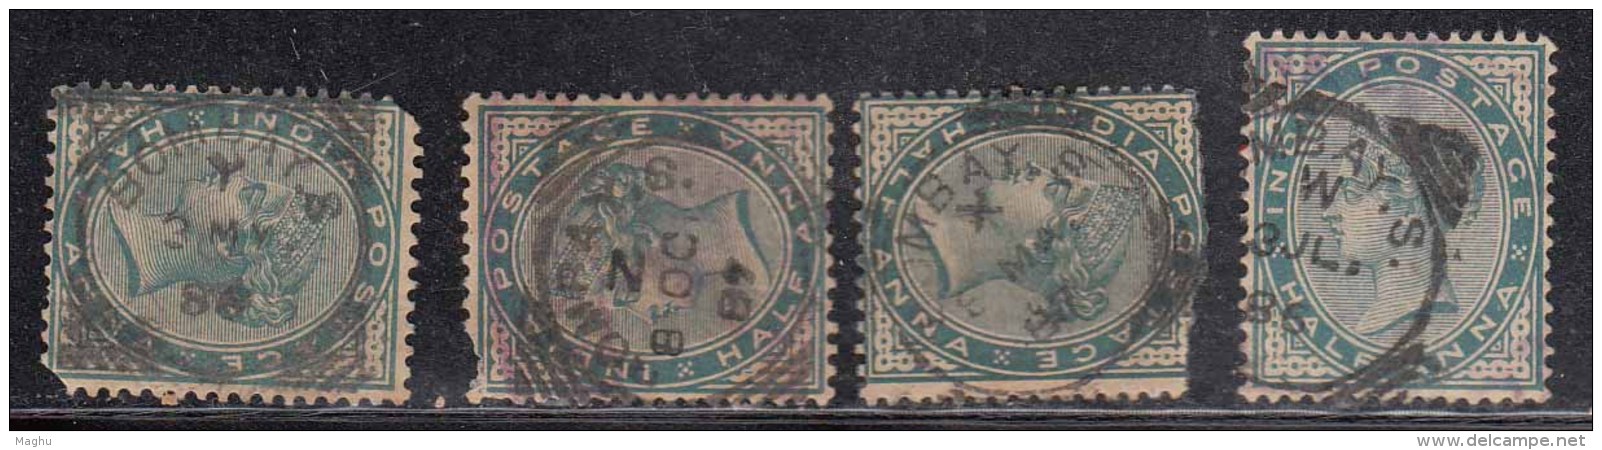 &frac12;a X 4  'BOMBAY',   X,Y, W, Etc., Postmark, QV Series British India Used, Early Indian Cancellations - 1882-1901 Empire